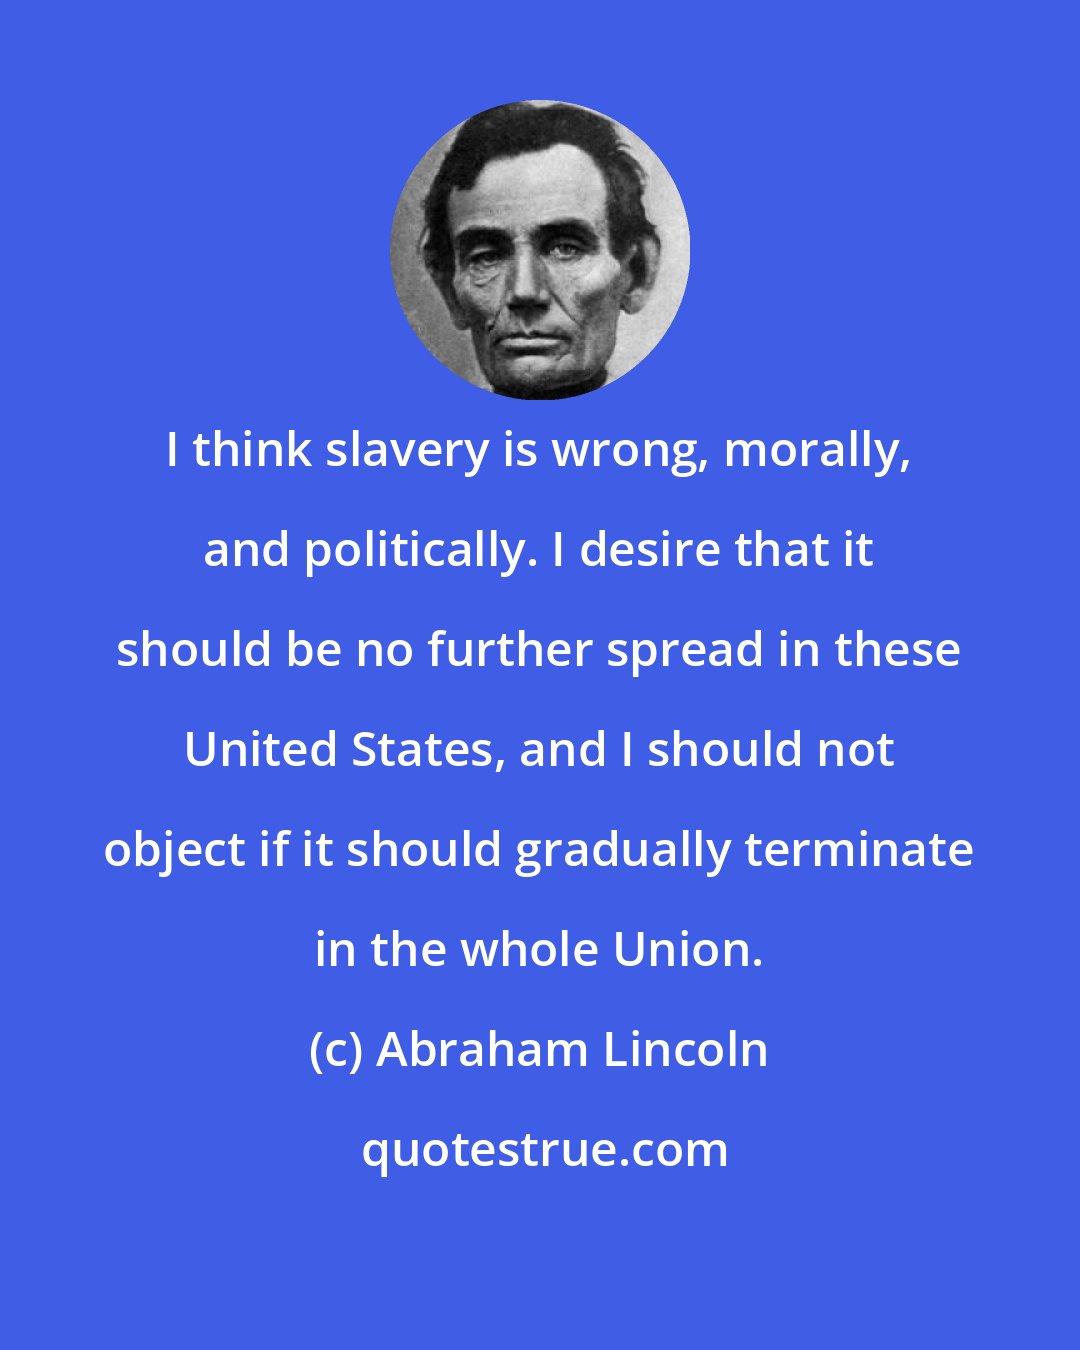 Abraham Lincoln: I think slavery is wrong, morally, and politically. I desire that it should be no further spread in these United States, and I should not object if it should gradually terminate in the whole Union.